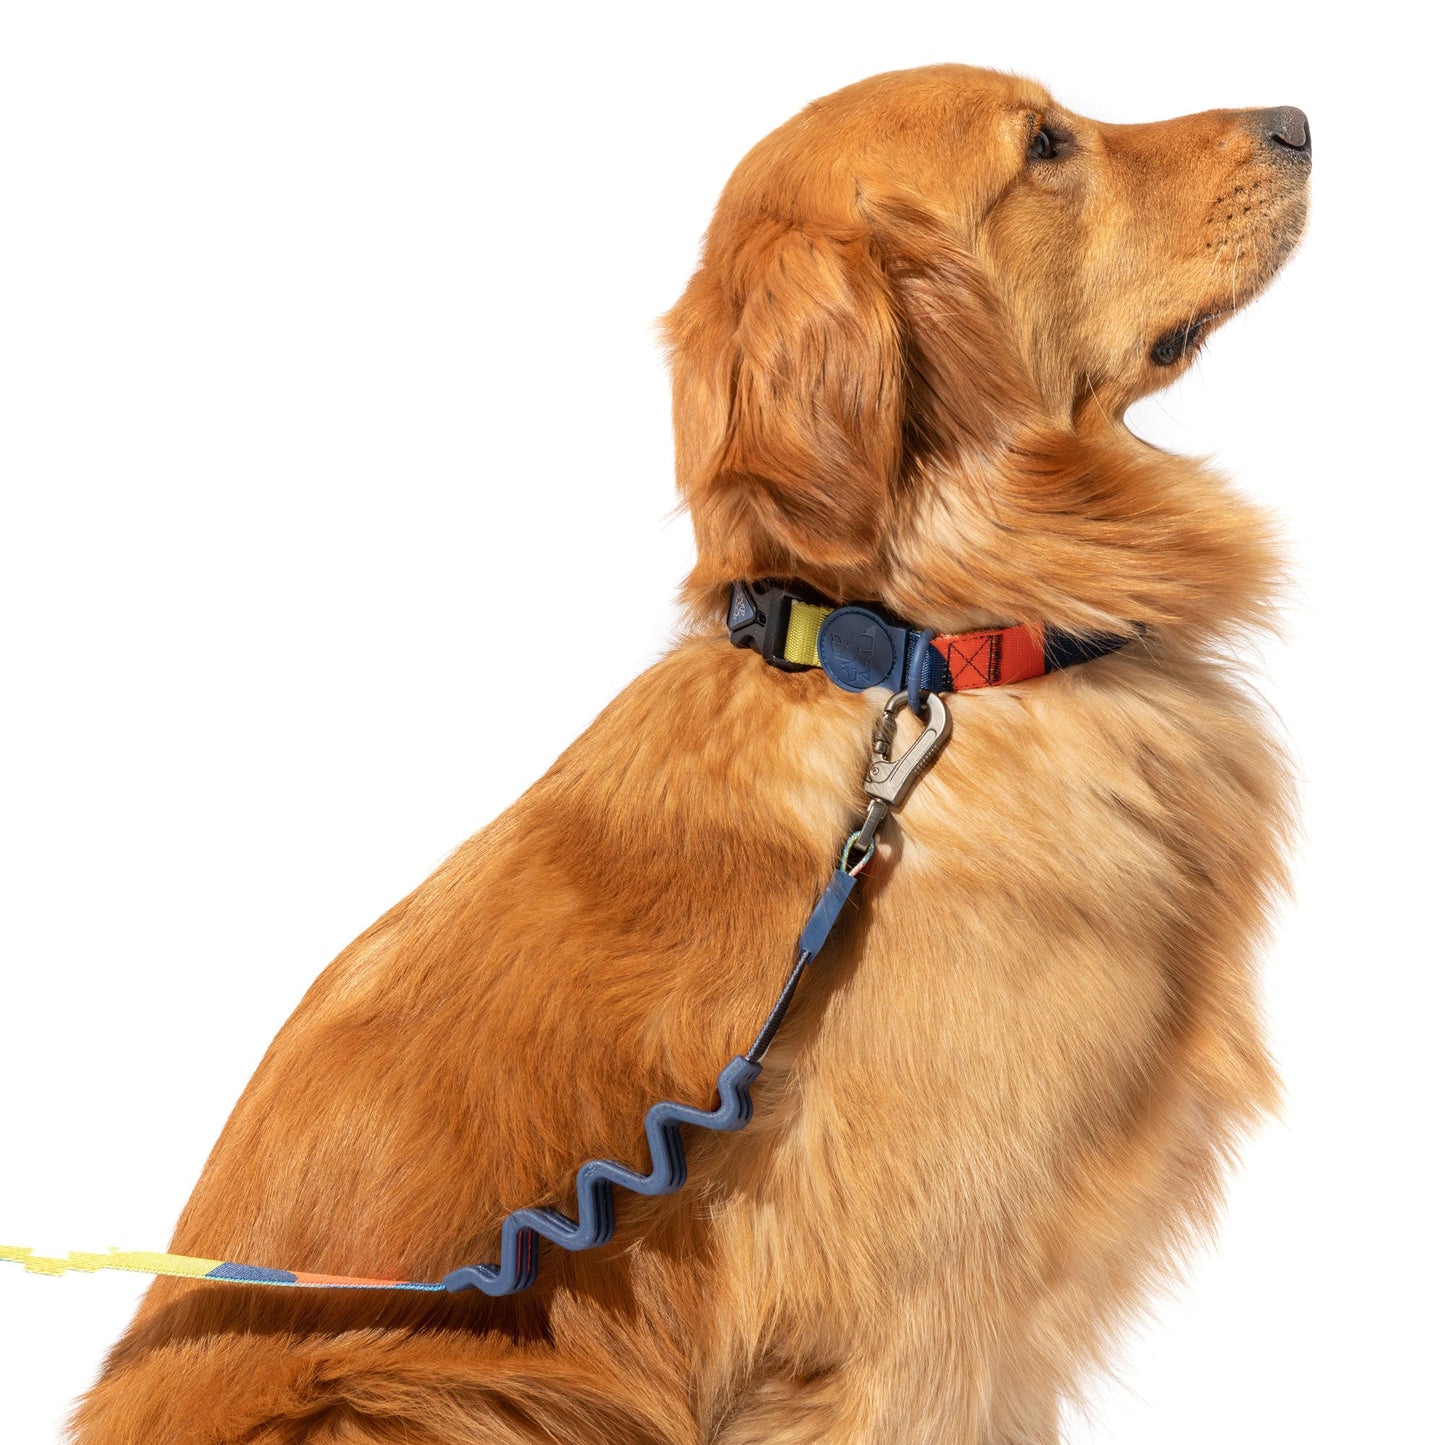 The ZigZag™ Durable Shock Absorbing Leash